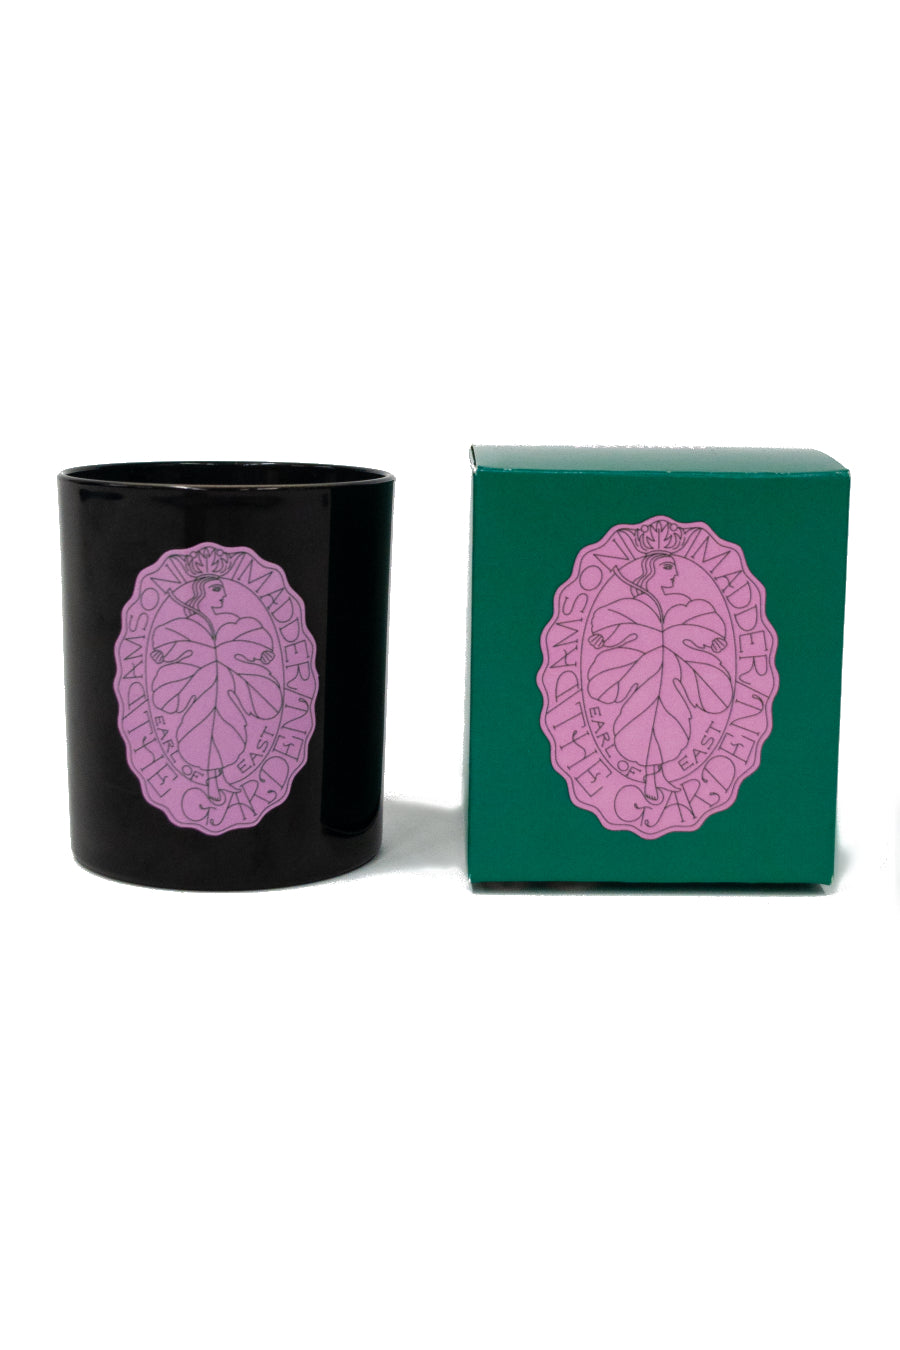 earl of east x damson madder candle - the garden